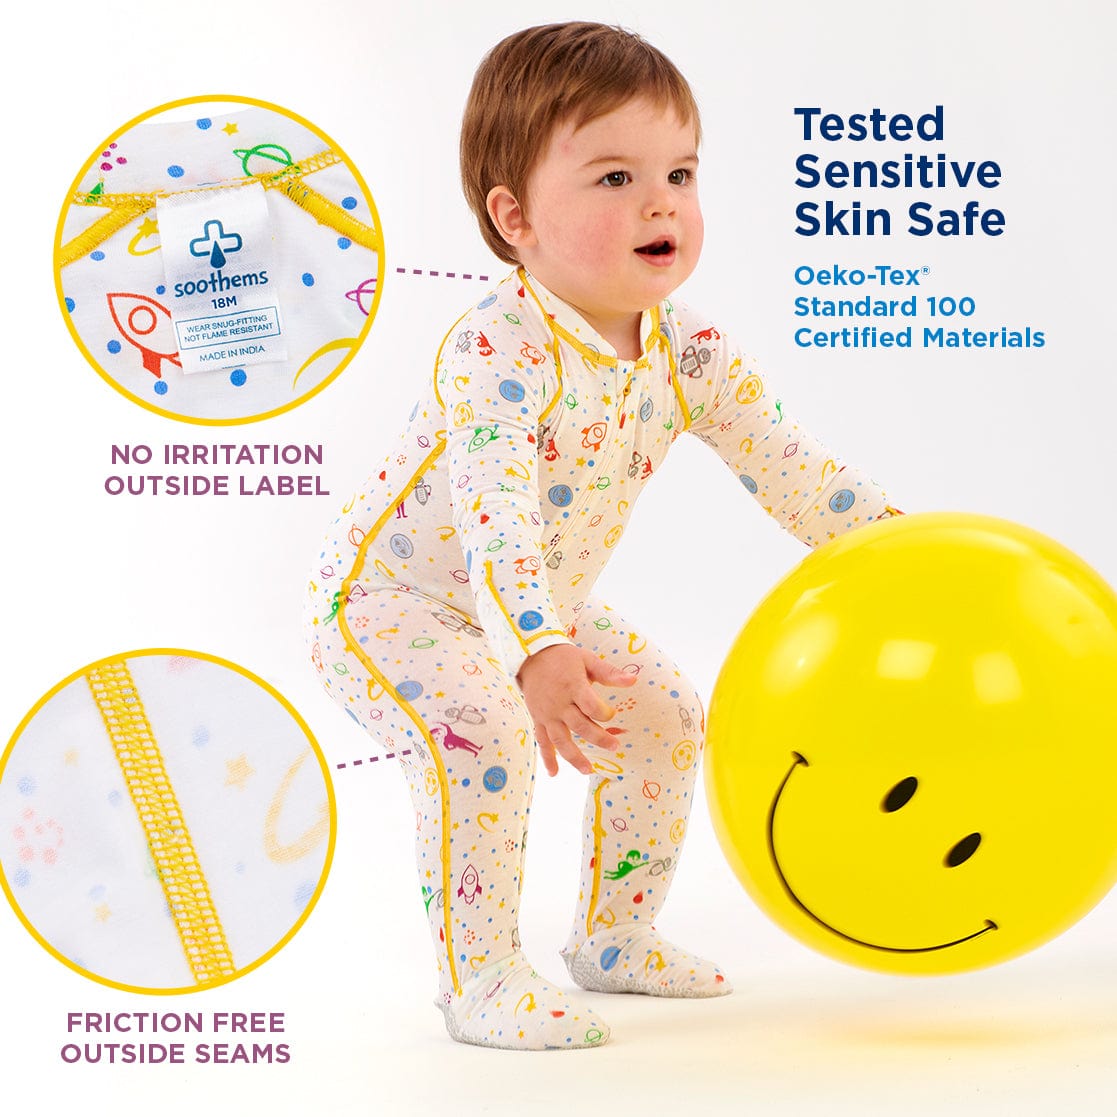 “Eczema Infant Sleepwear made from TENCEL with irritation free seams for boy and girls with Sensitive Skin and Sensory Disorder” 